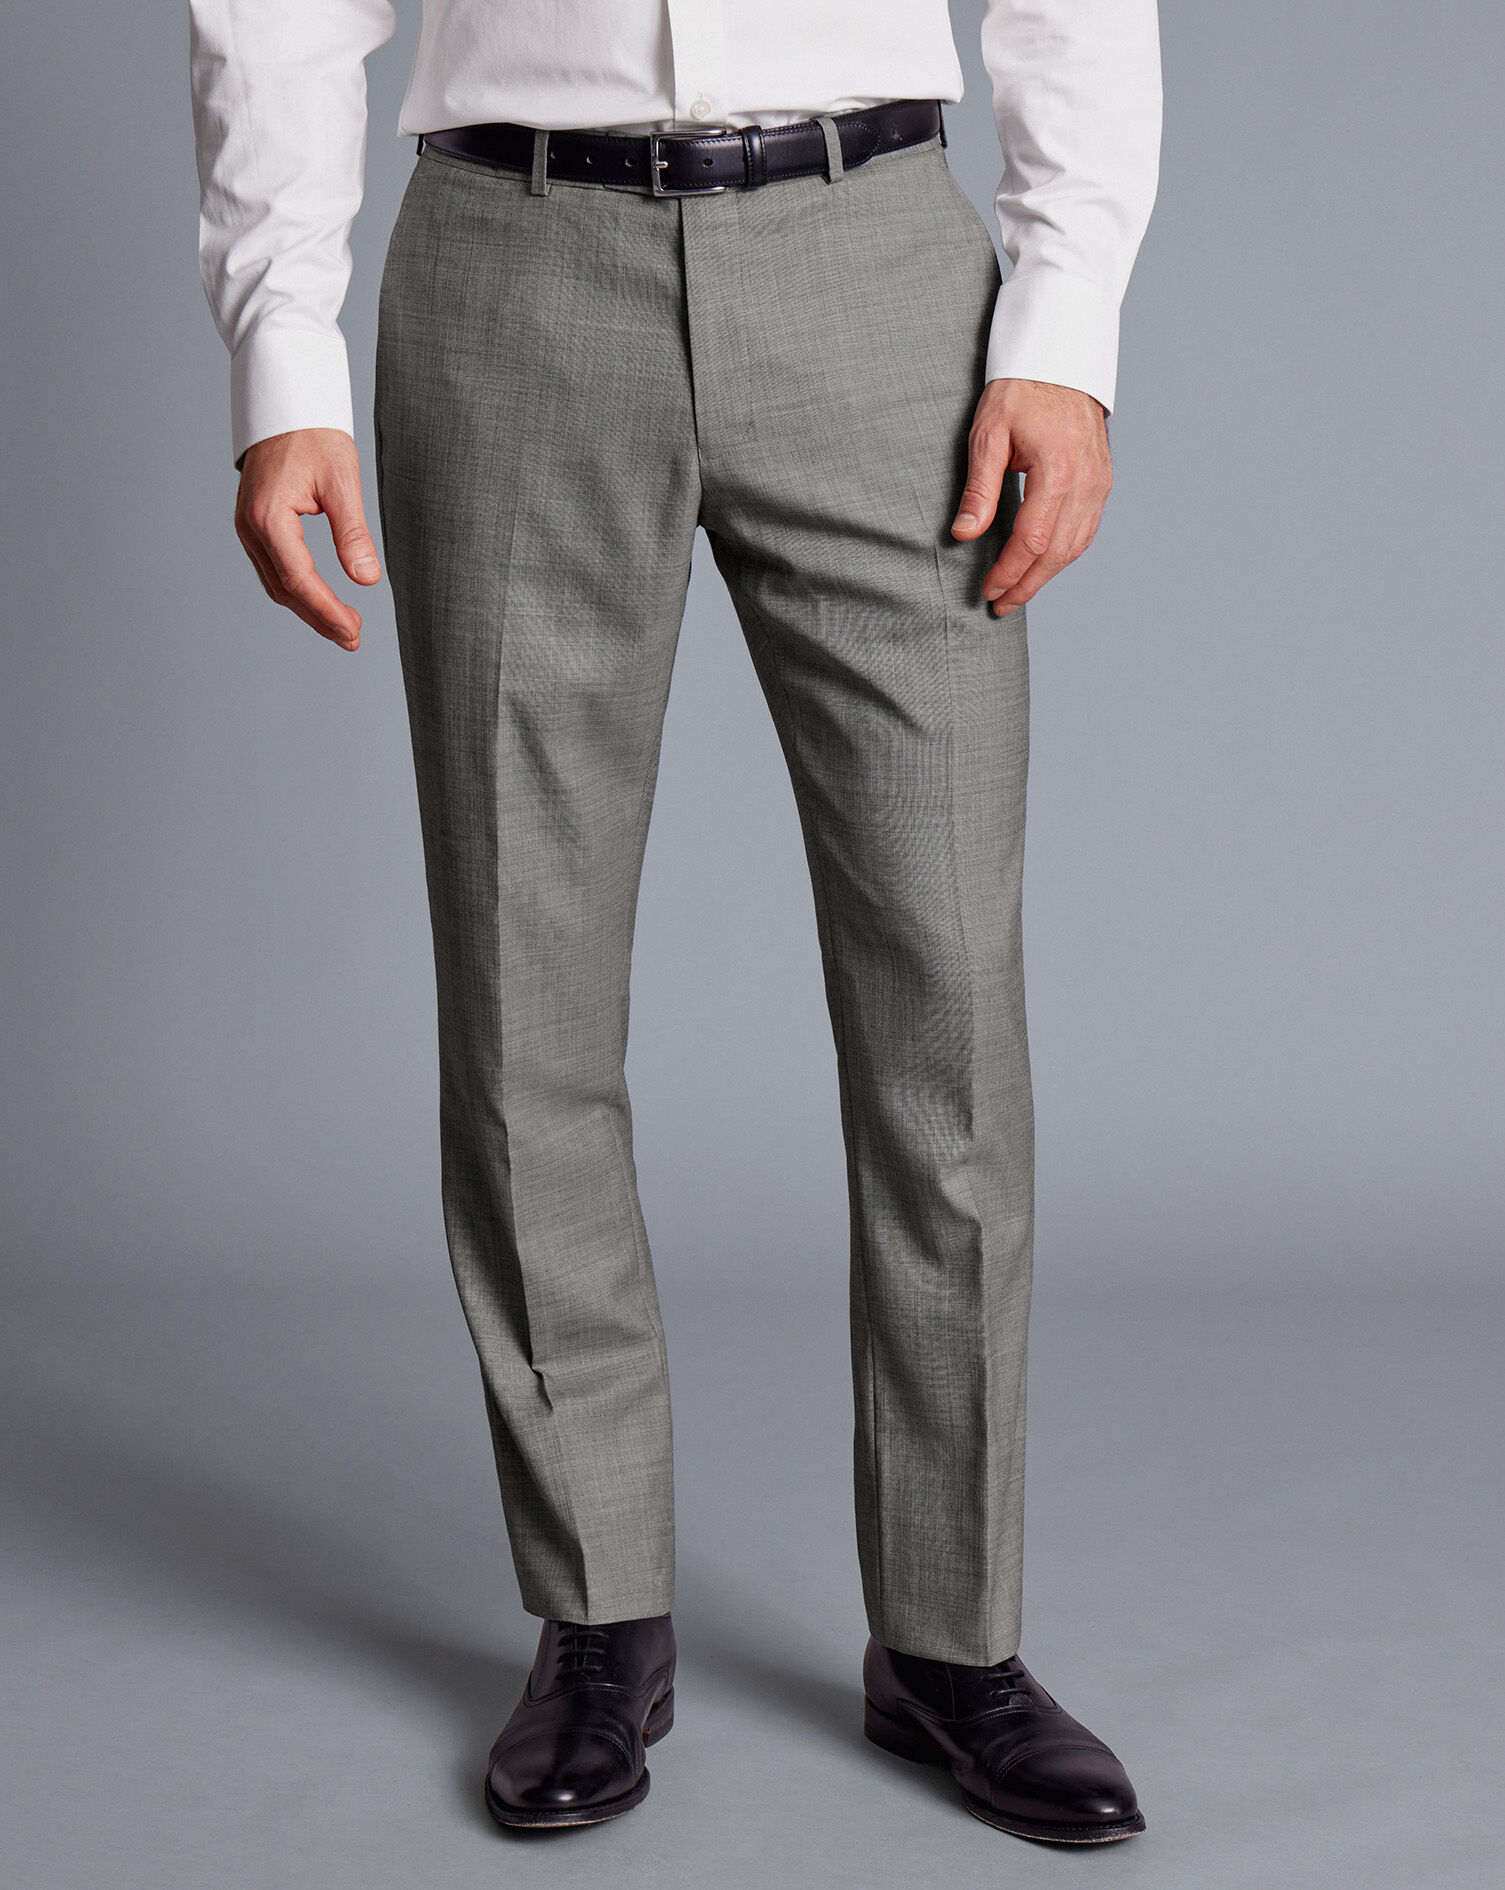 Occasions | Grey Regular Fit Suit Trousers | SuitDirect.co.uk